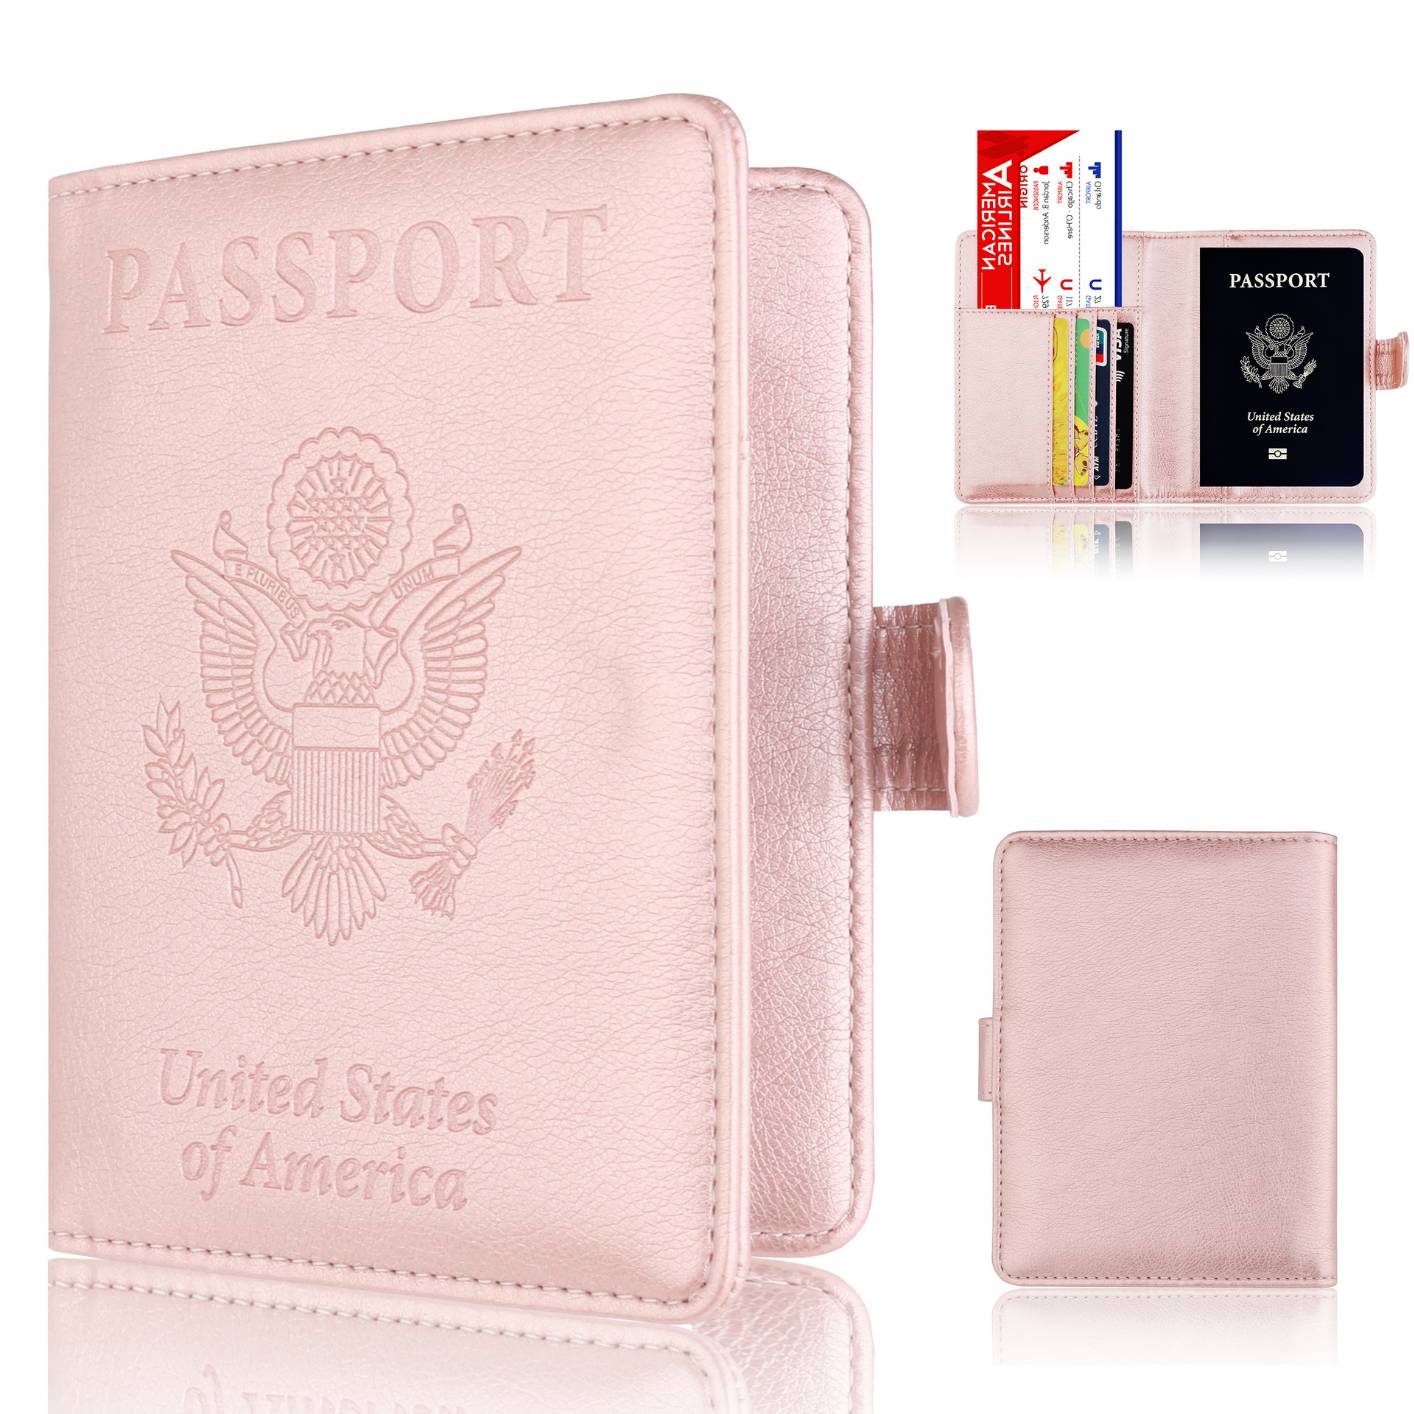 RFID1002 Passport and Vaccine Card Holder Combo, Cover Case with CDC Vaccination Card Slot, Leather Travel Documents Organizer Protector ，for Women and Men, Rose Gold